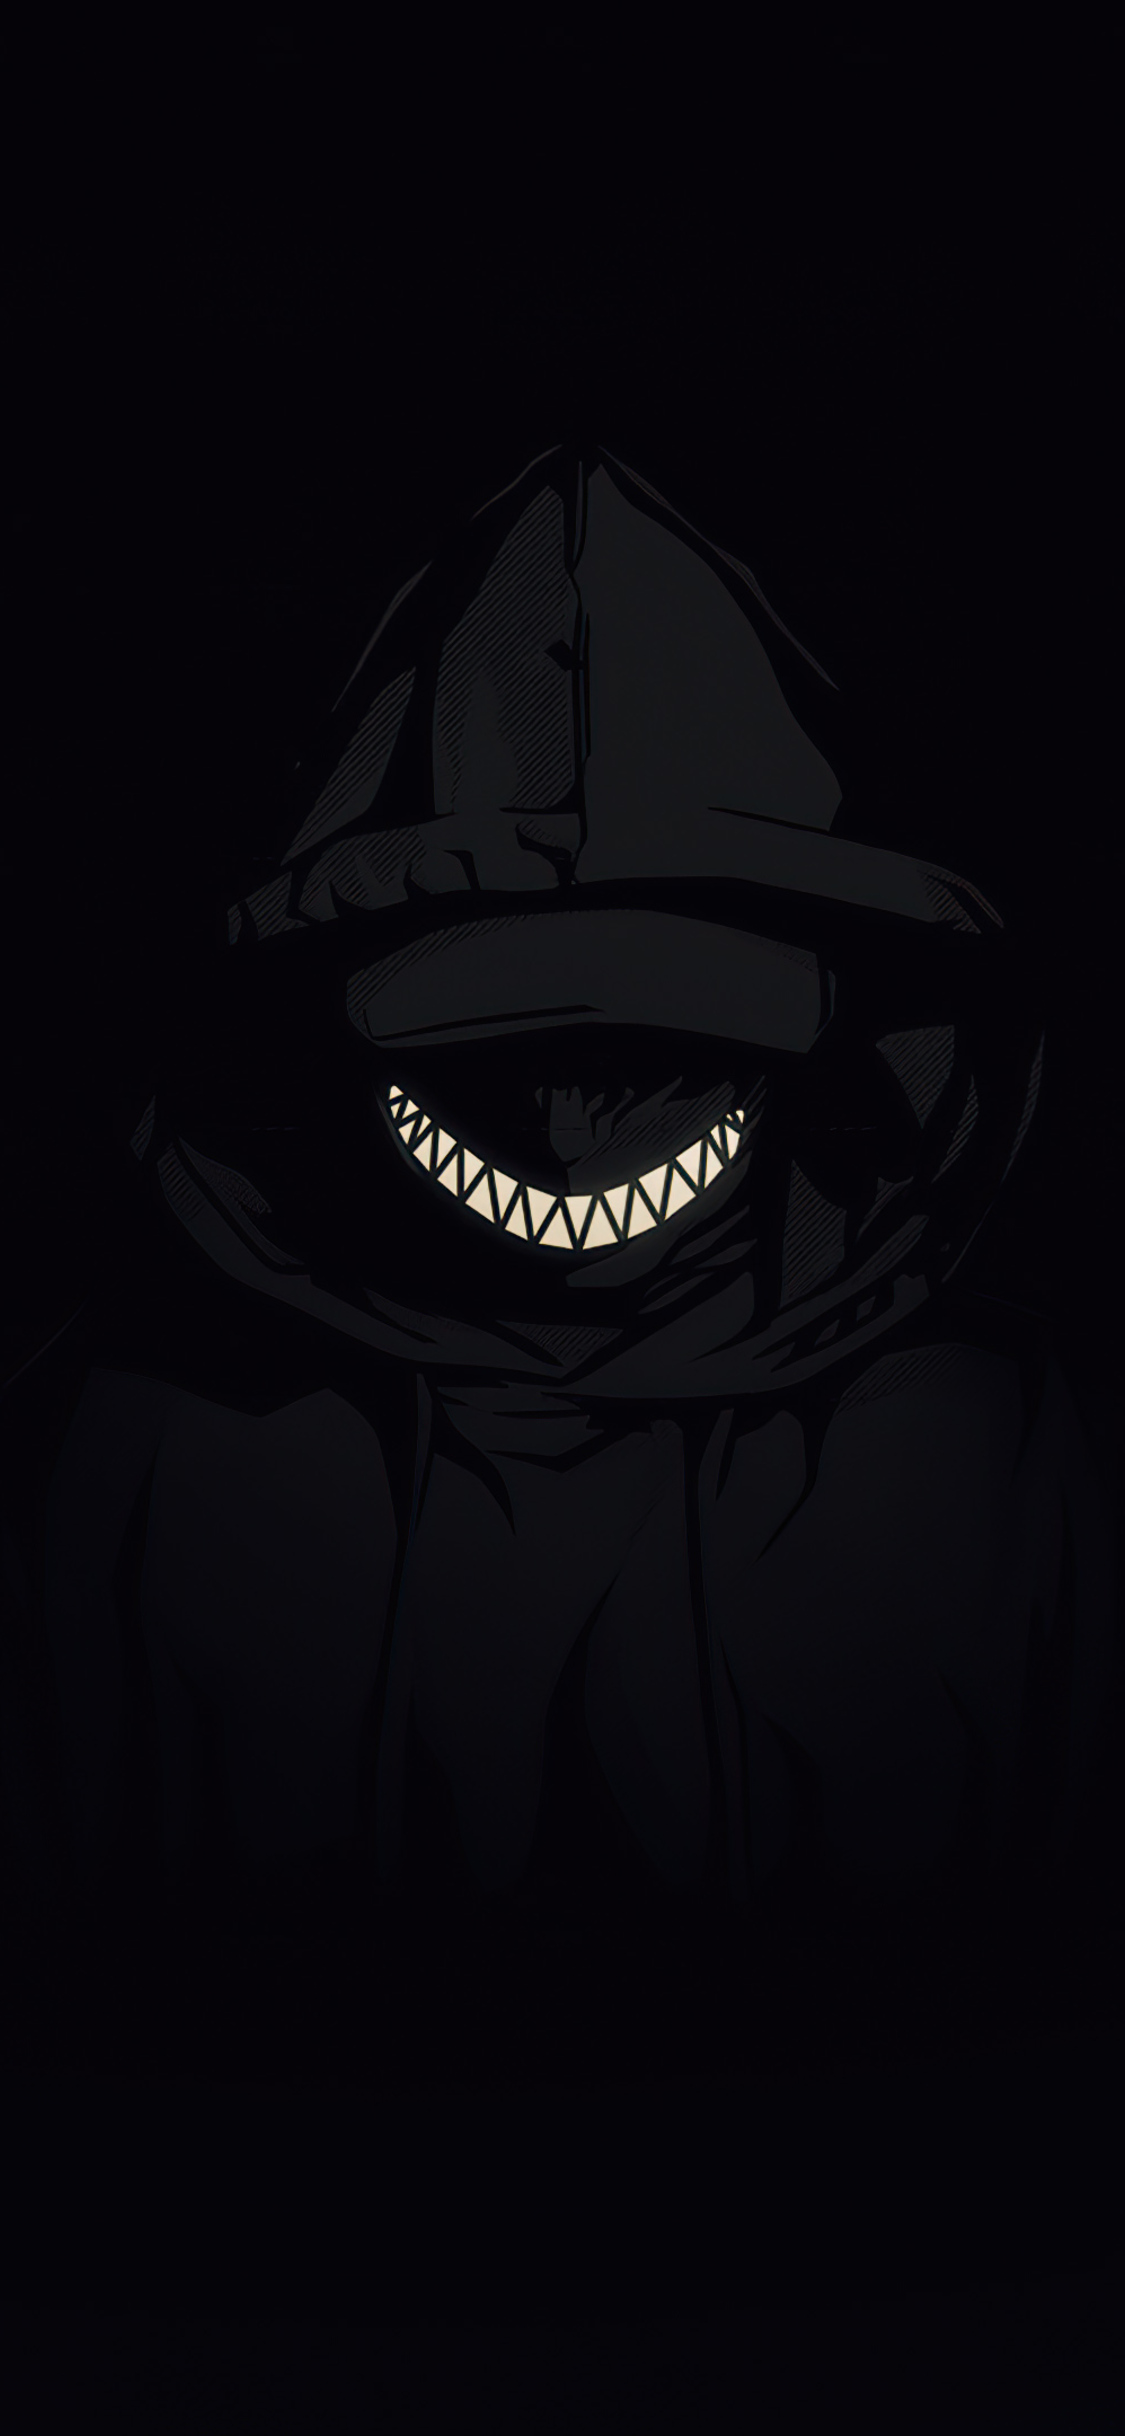 Hooded Jacket Boy Smiling Minimal Dark 4k iPhone XS, iPhone iPhone X HD 4k Wallpaper, Image, Background, Photo and Picture